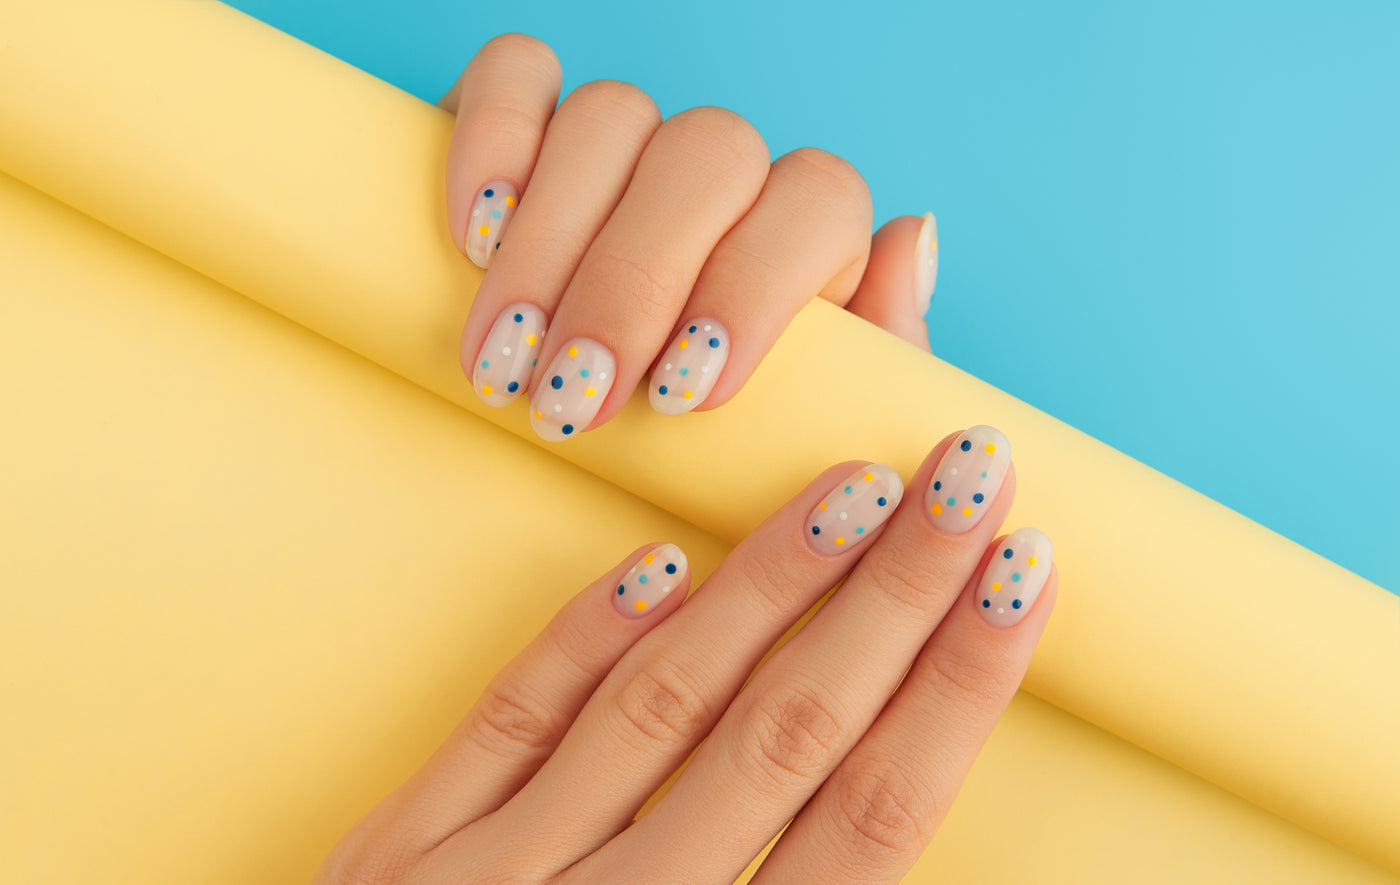 Summer nails on a yellow and blue background